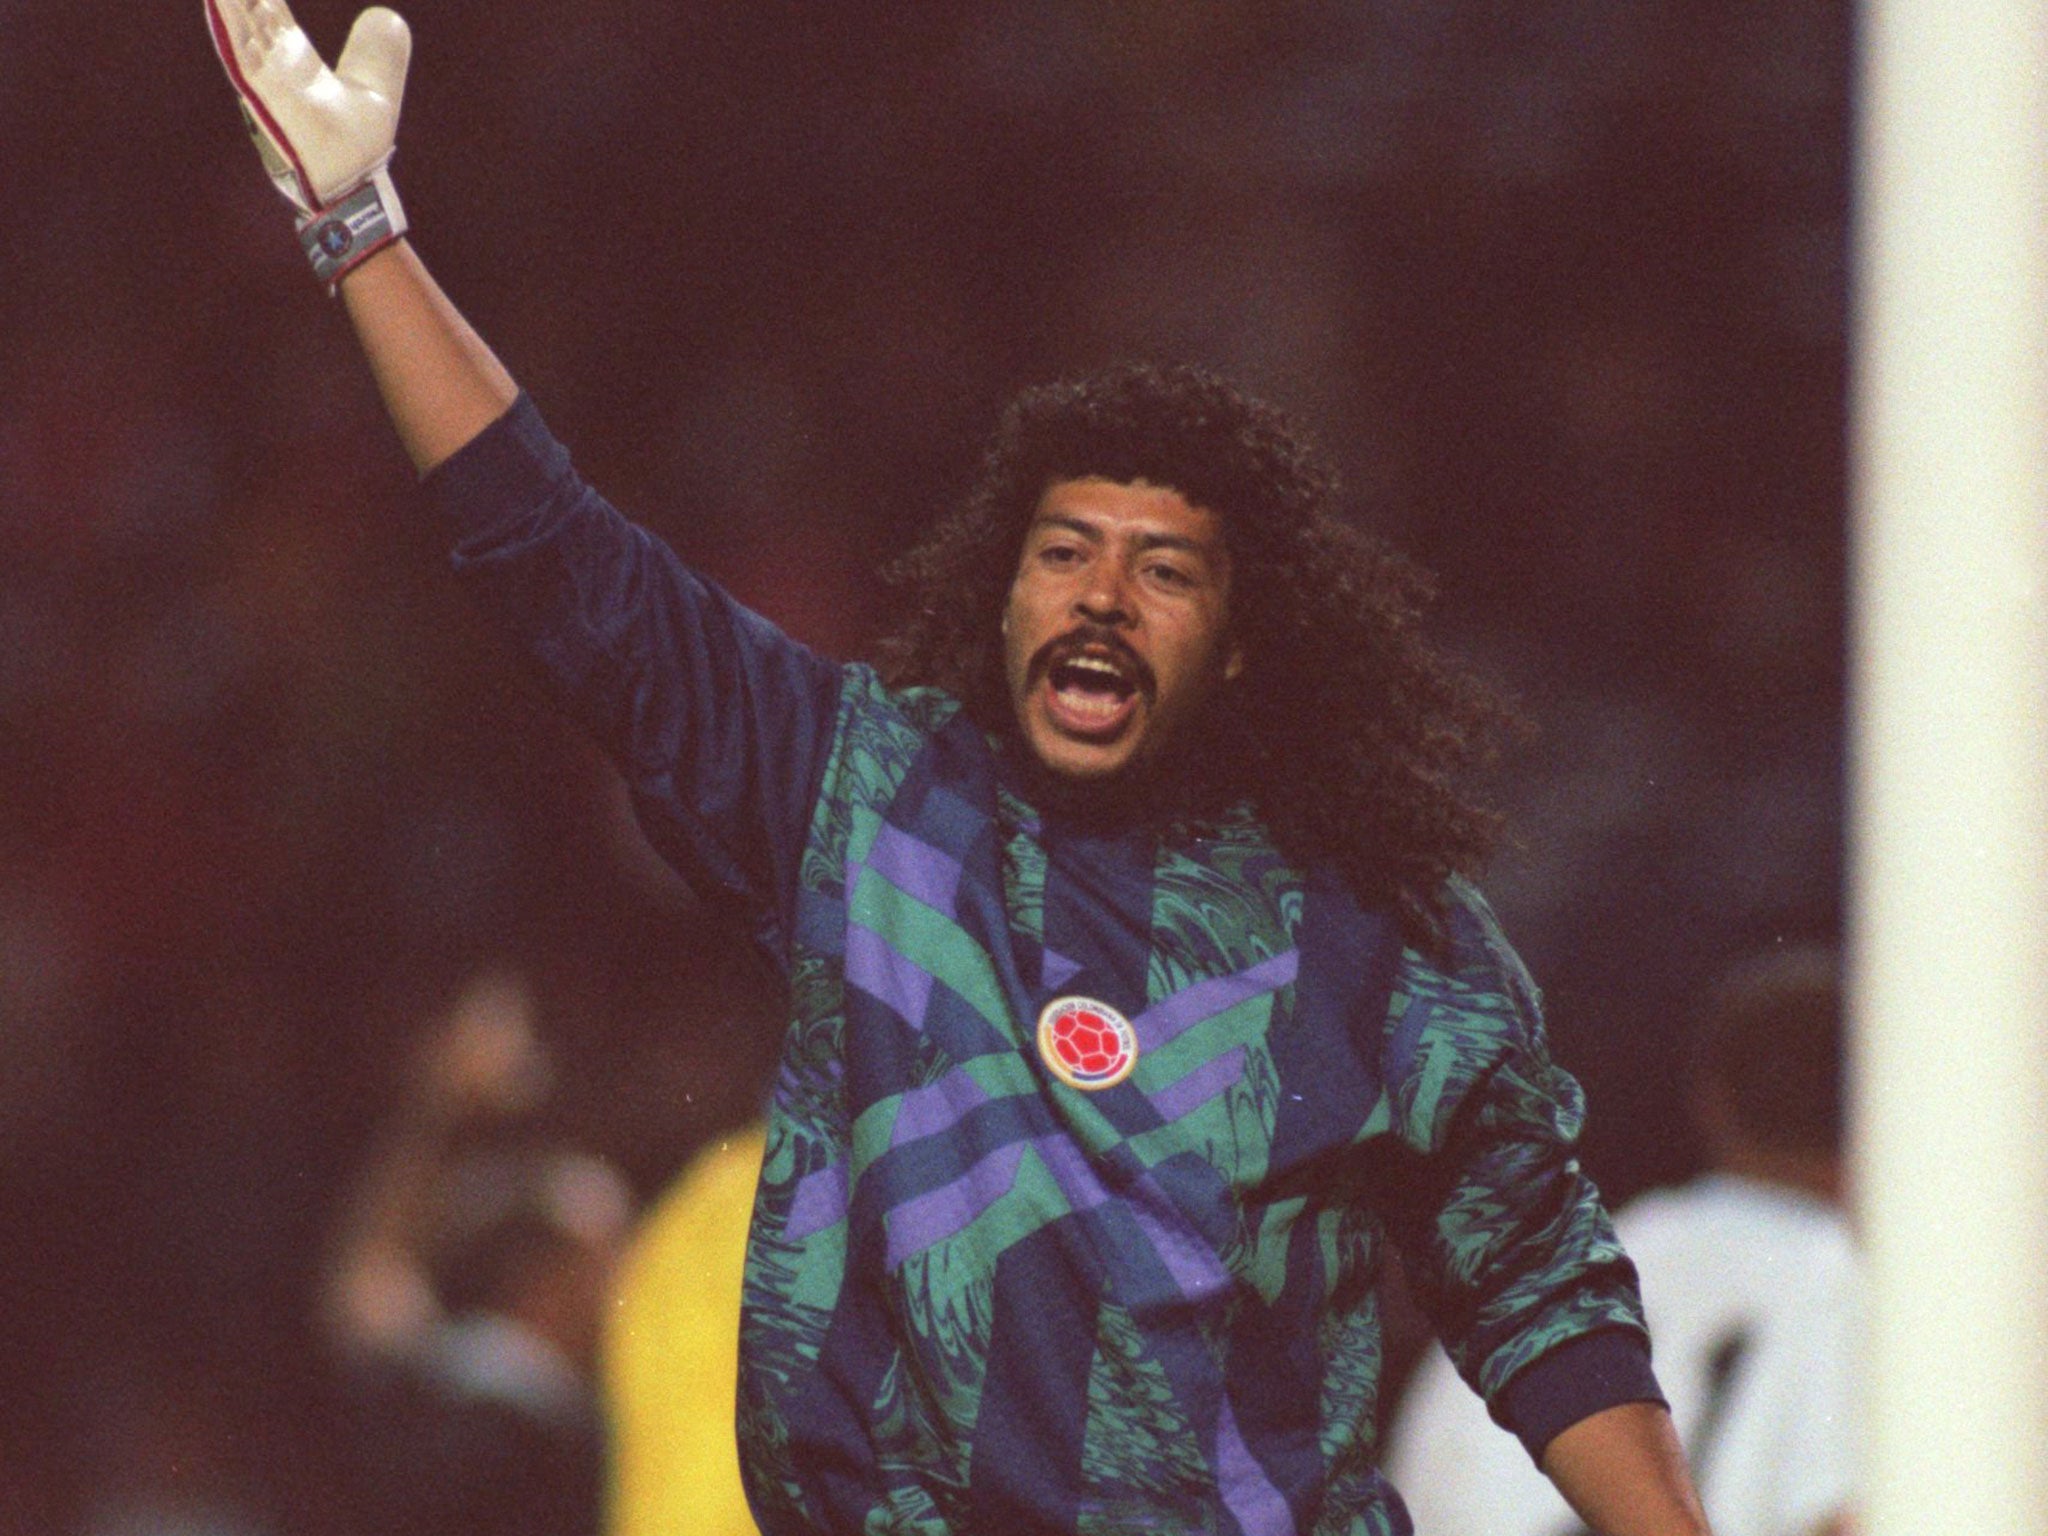 Rene Higuita pictured during the friendly against England at Wembley back in September 1995 when he performed the scorpion kick